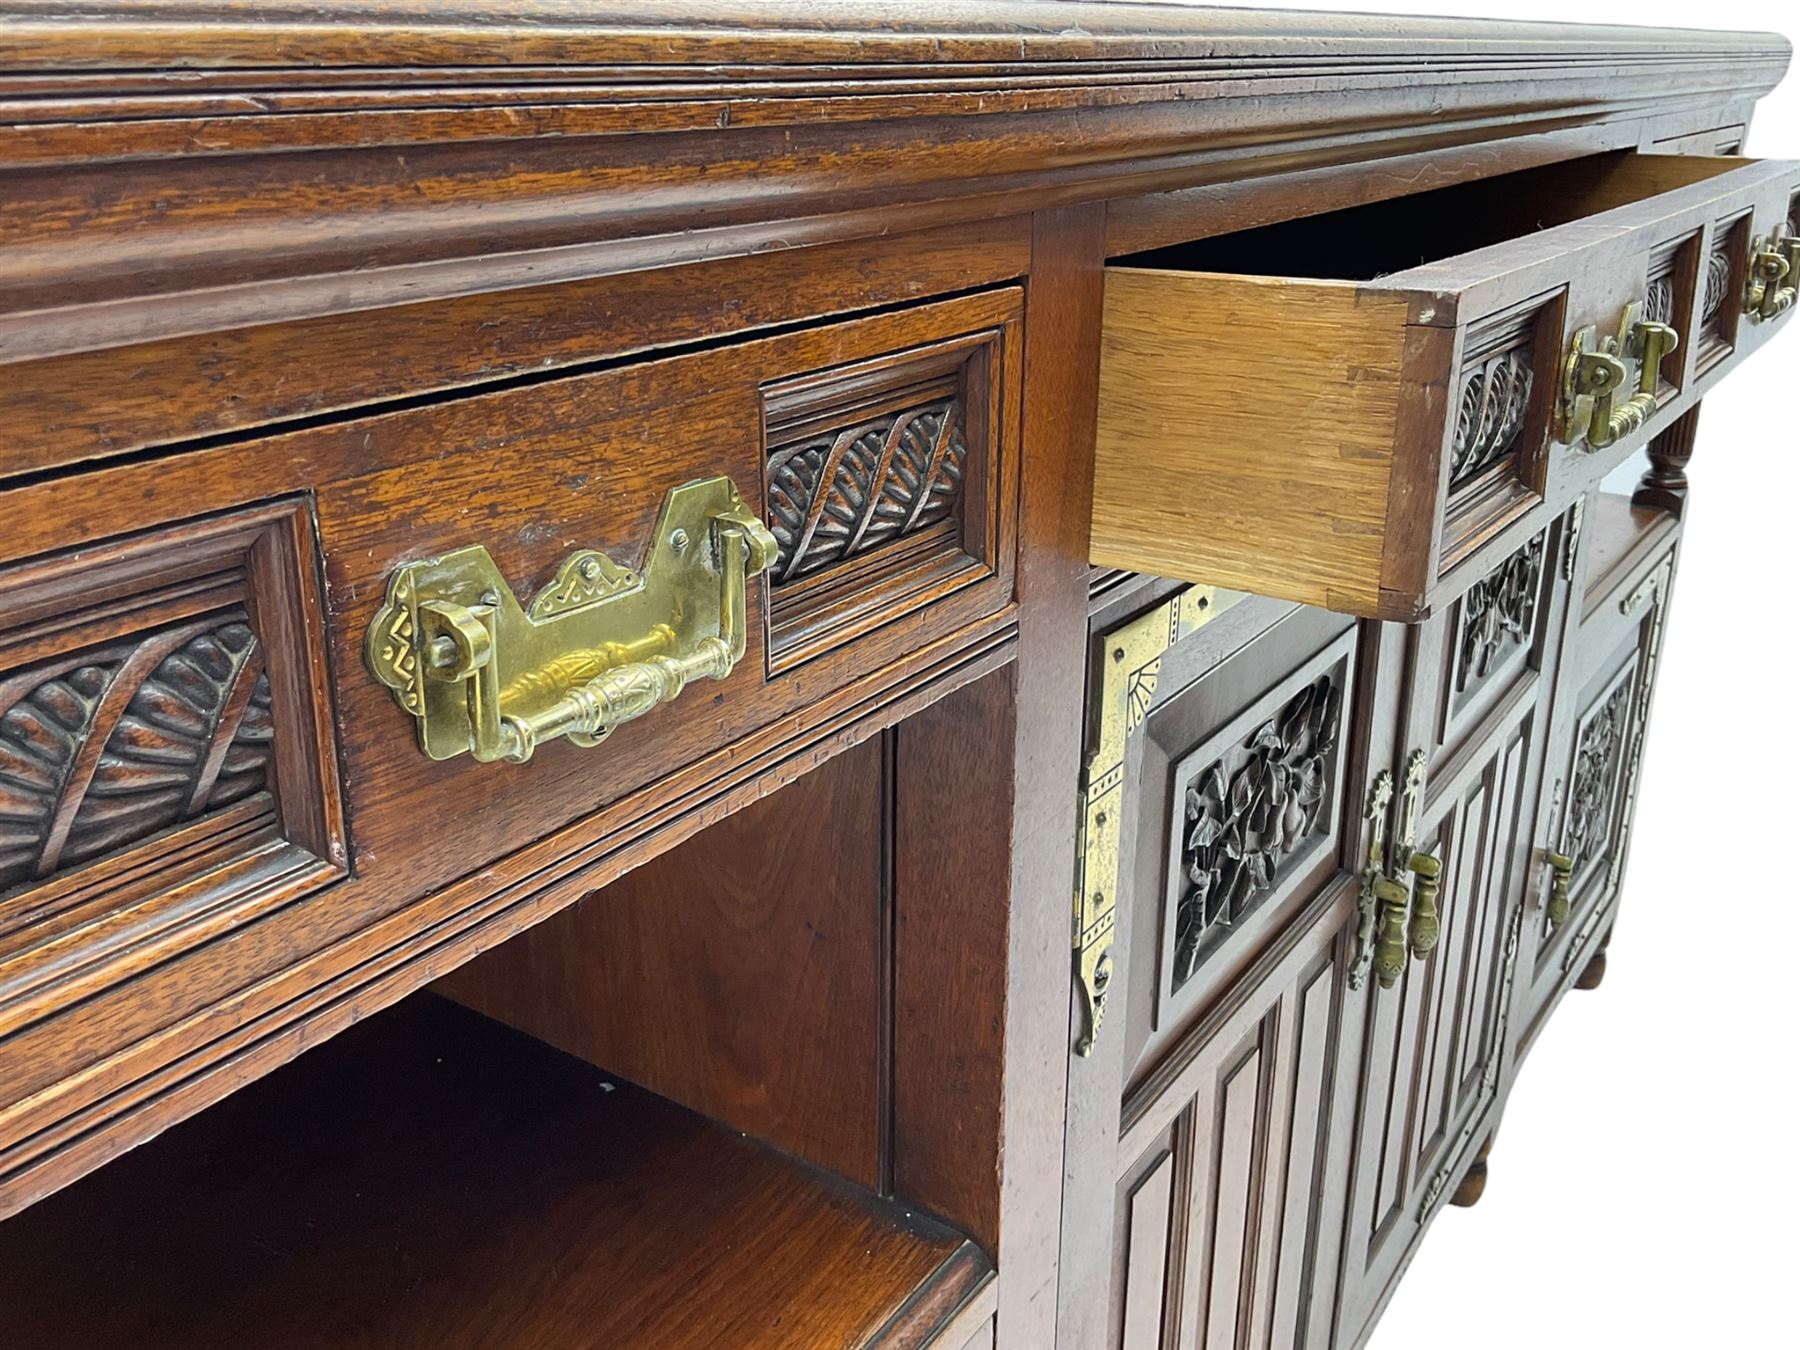 Late 19th century Aesthetic Movement walnut sideboard - Image 6 of 7